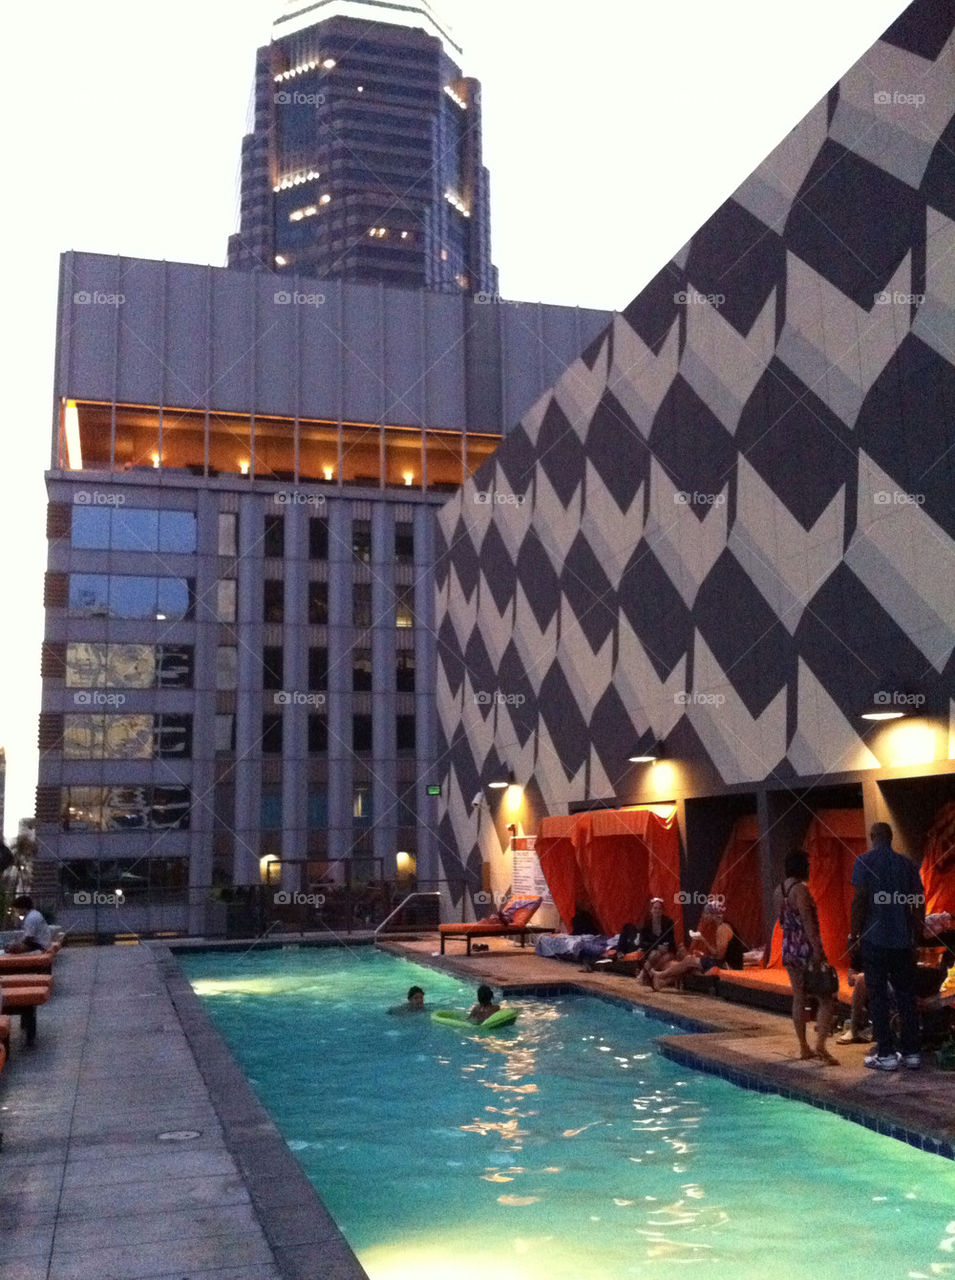 los angeles pool top of building by paul.reilly546